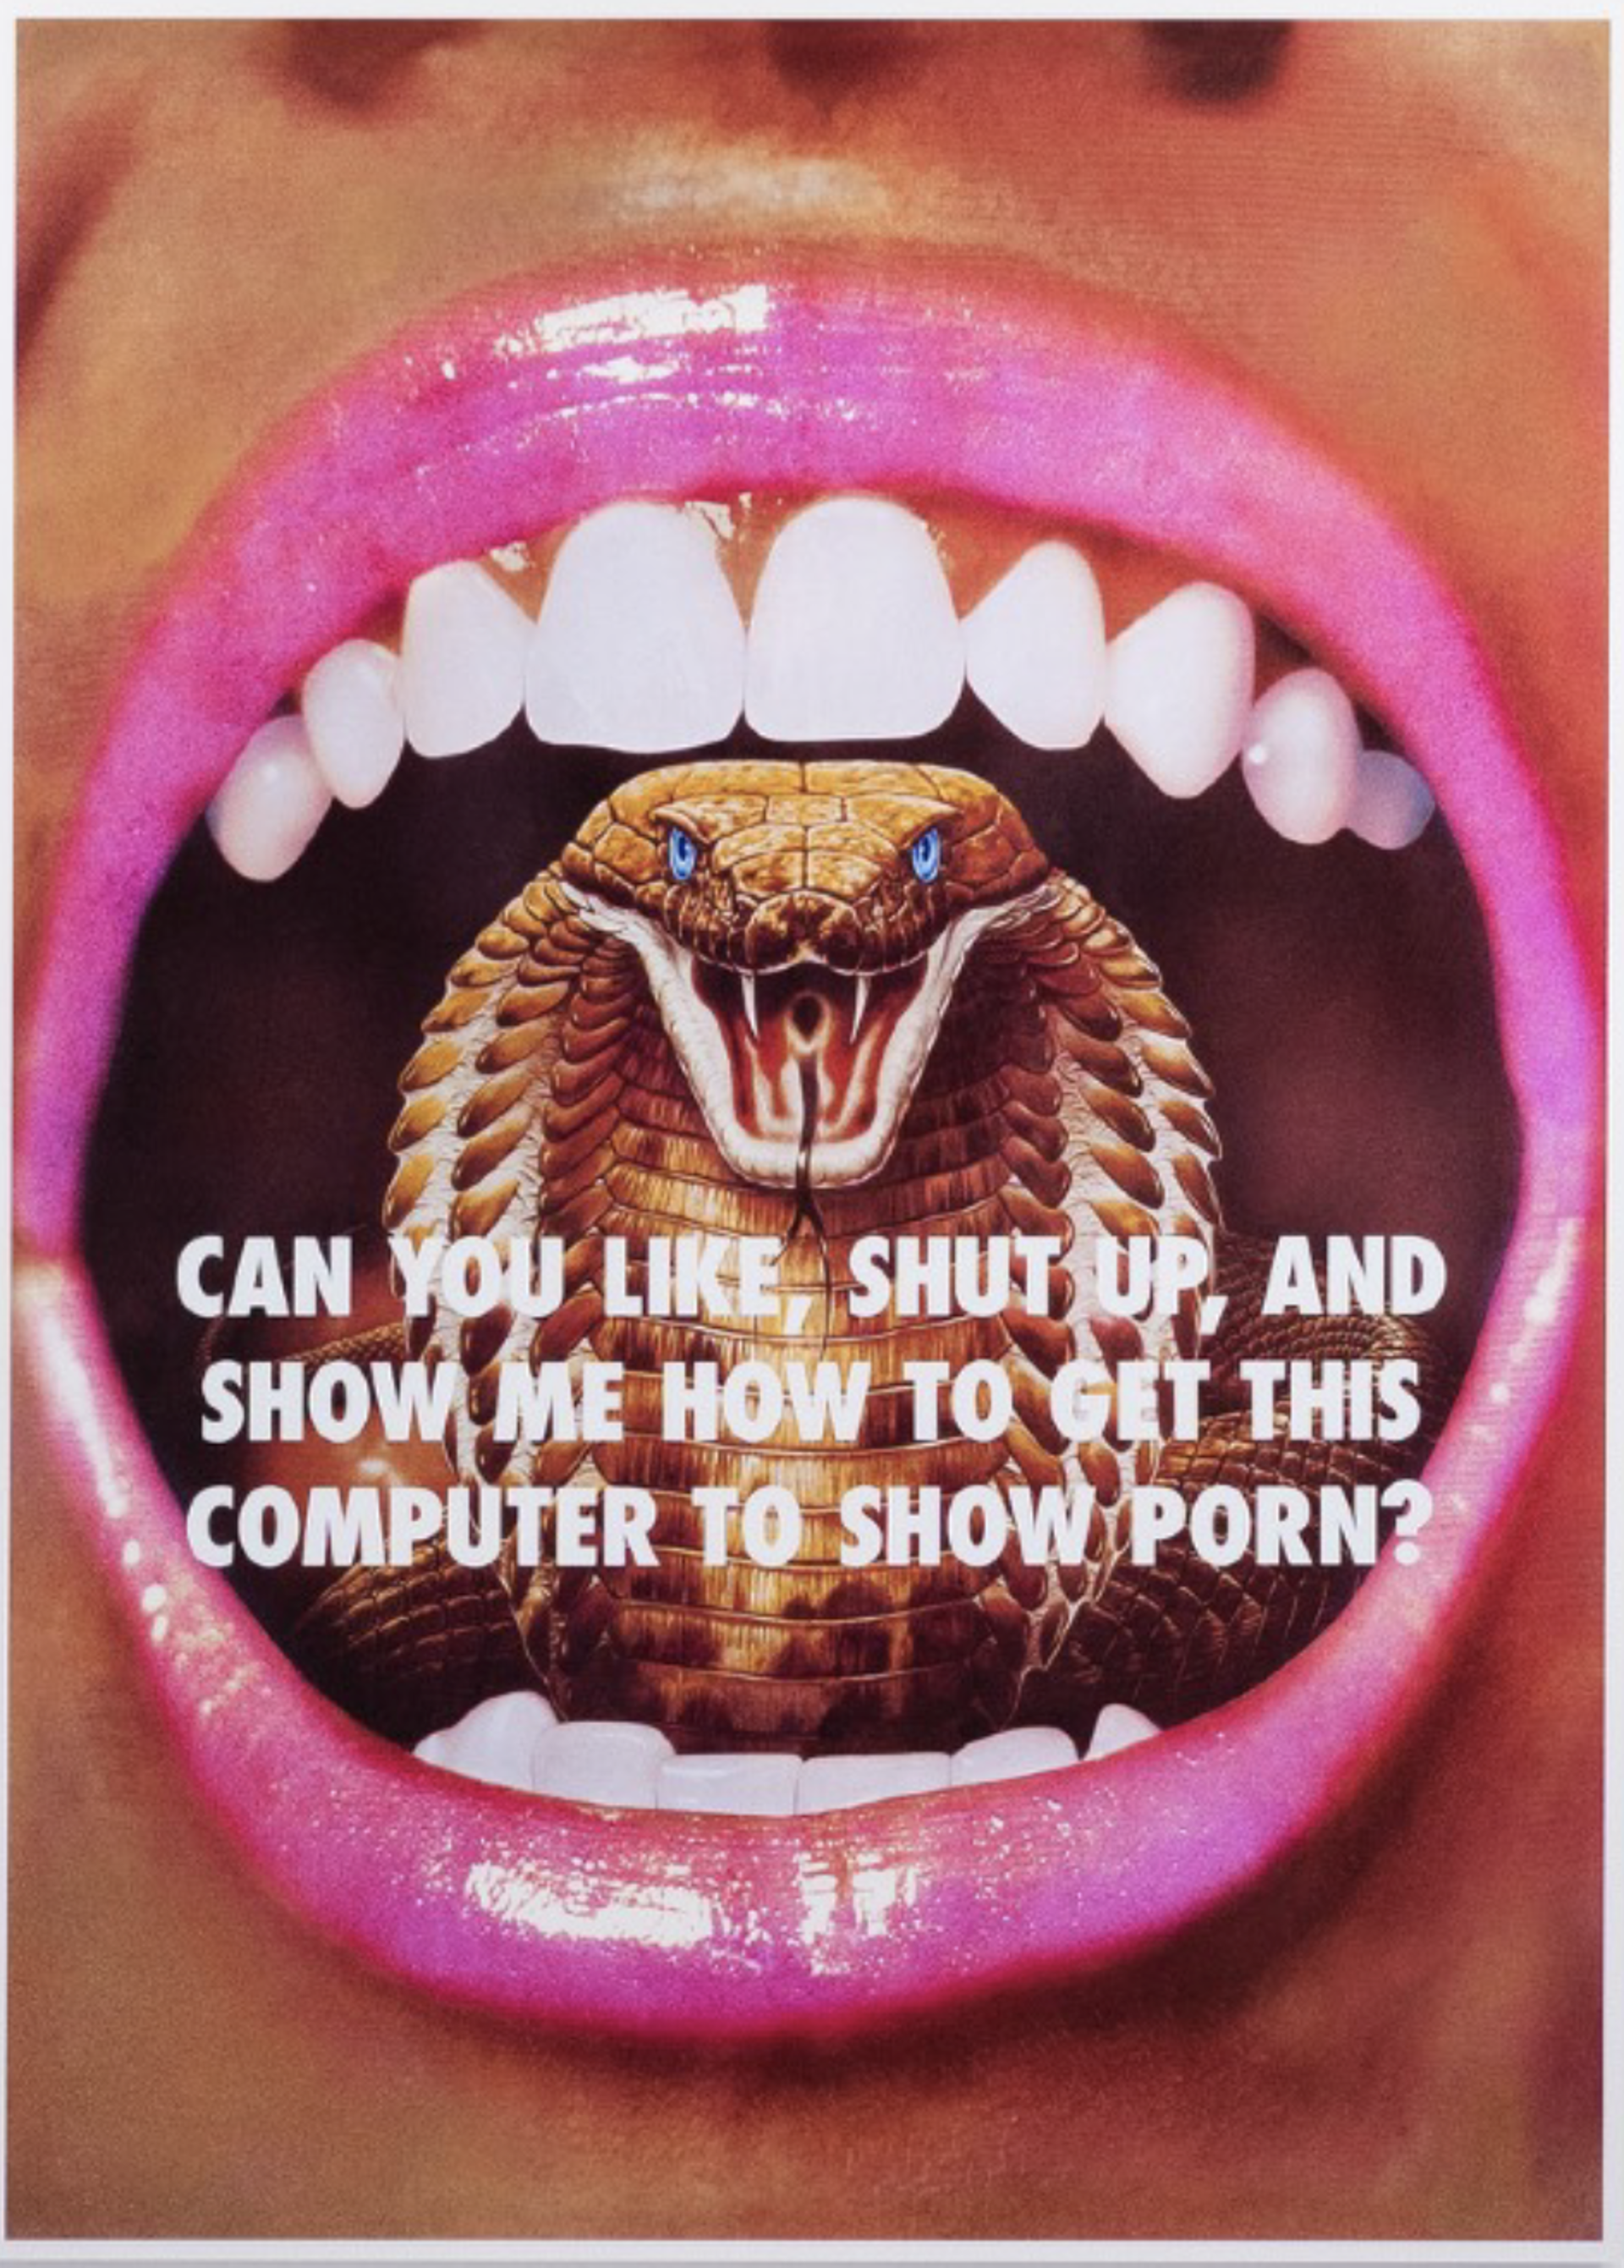 Can You Like, Shut Up, And Show Me How To Get This Computer To Show Porn? by Reed Weily